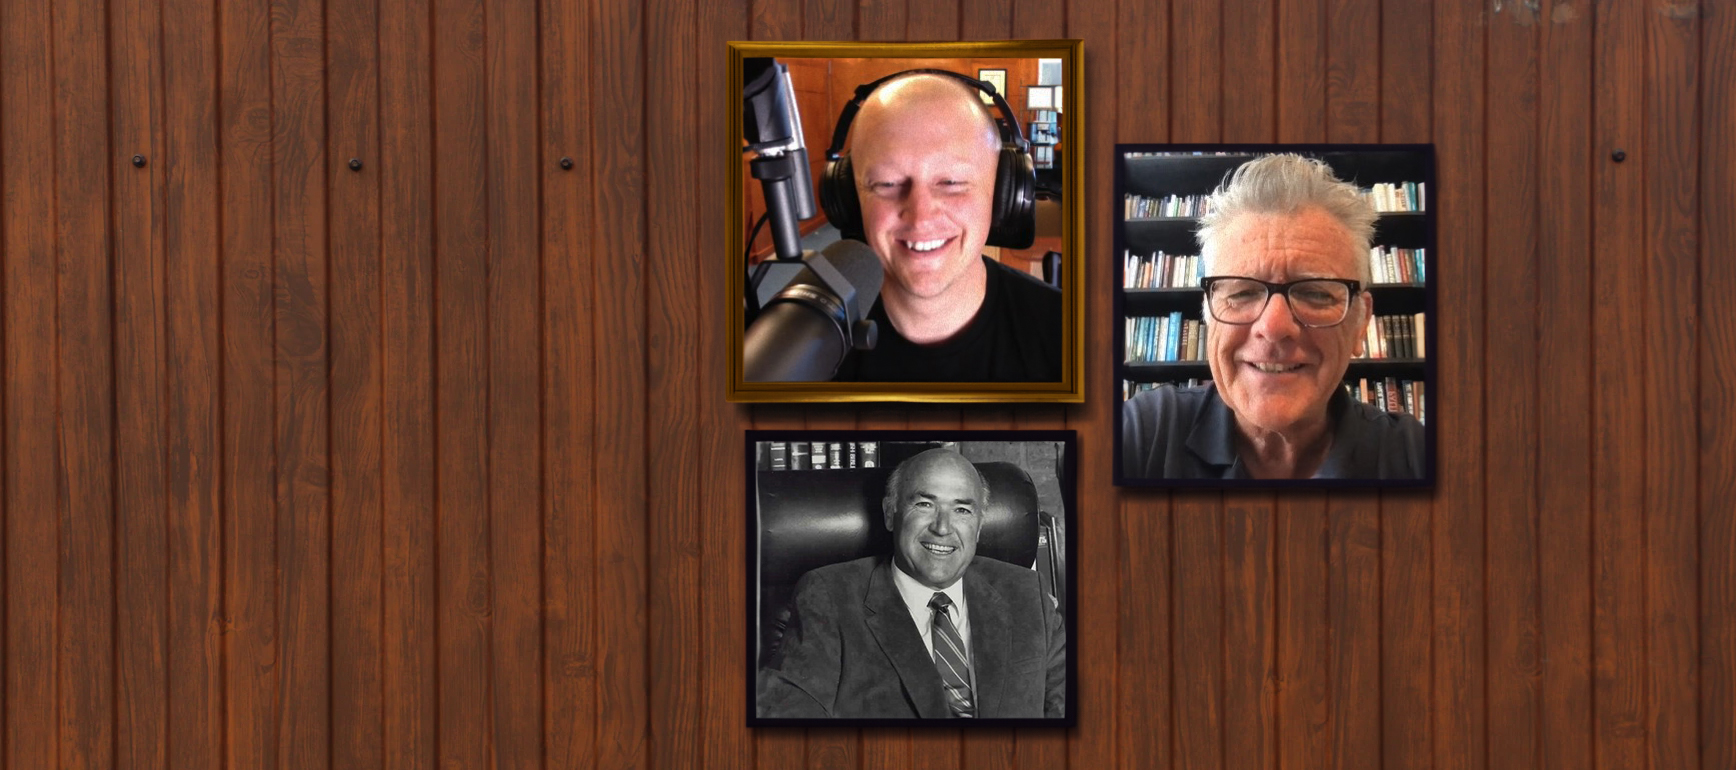 A Q&A On Chuck Smith’s Approach To Ministry – With Nick Cady And Brian Brodersen